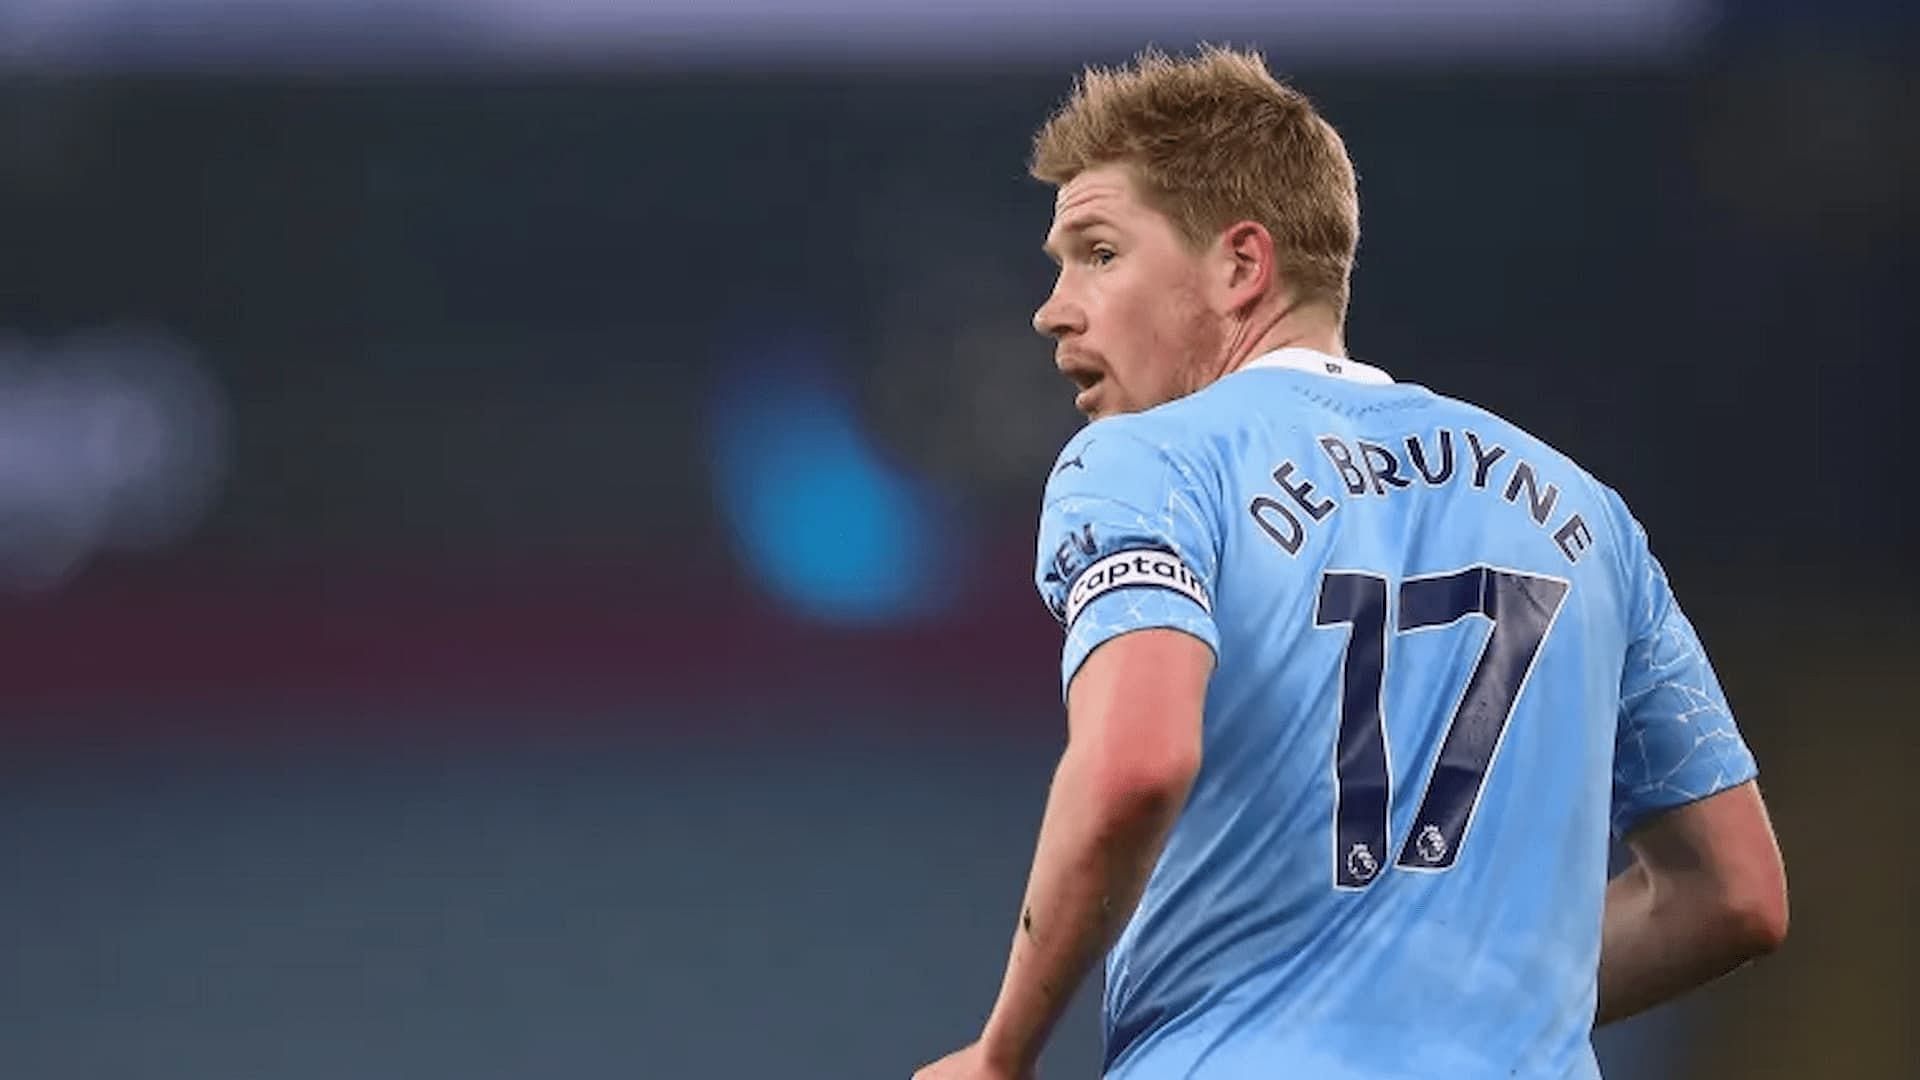 Kevin De Bruyne wears the number 17 at Manchester City (Image via Getty)